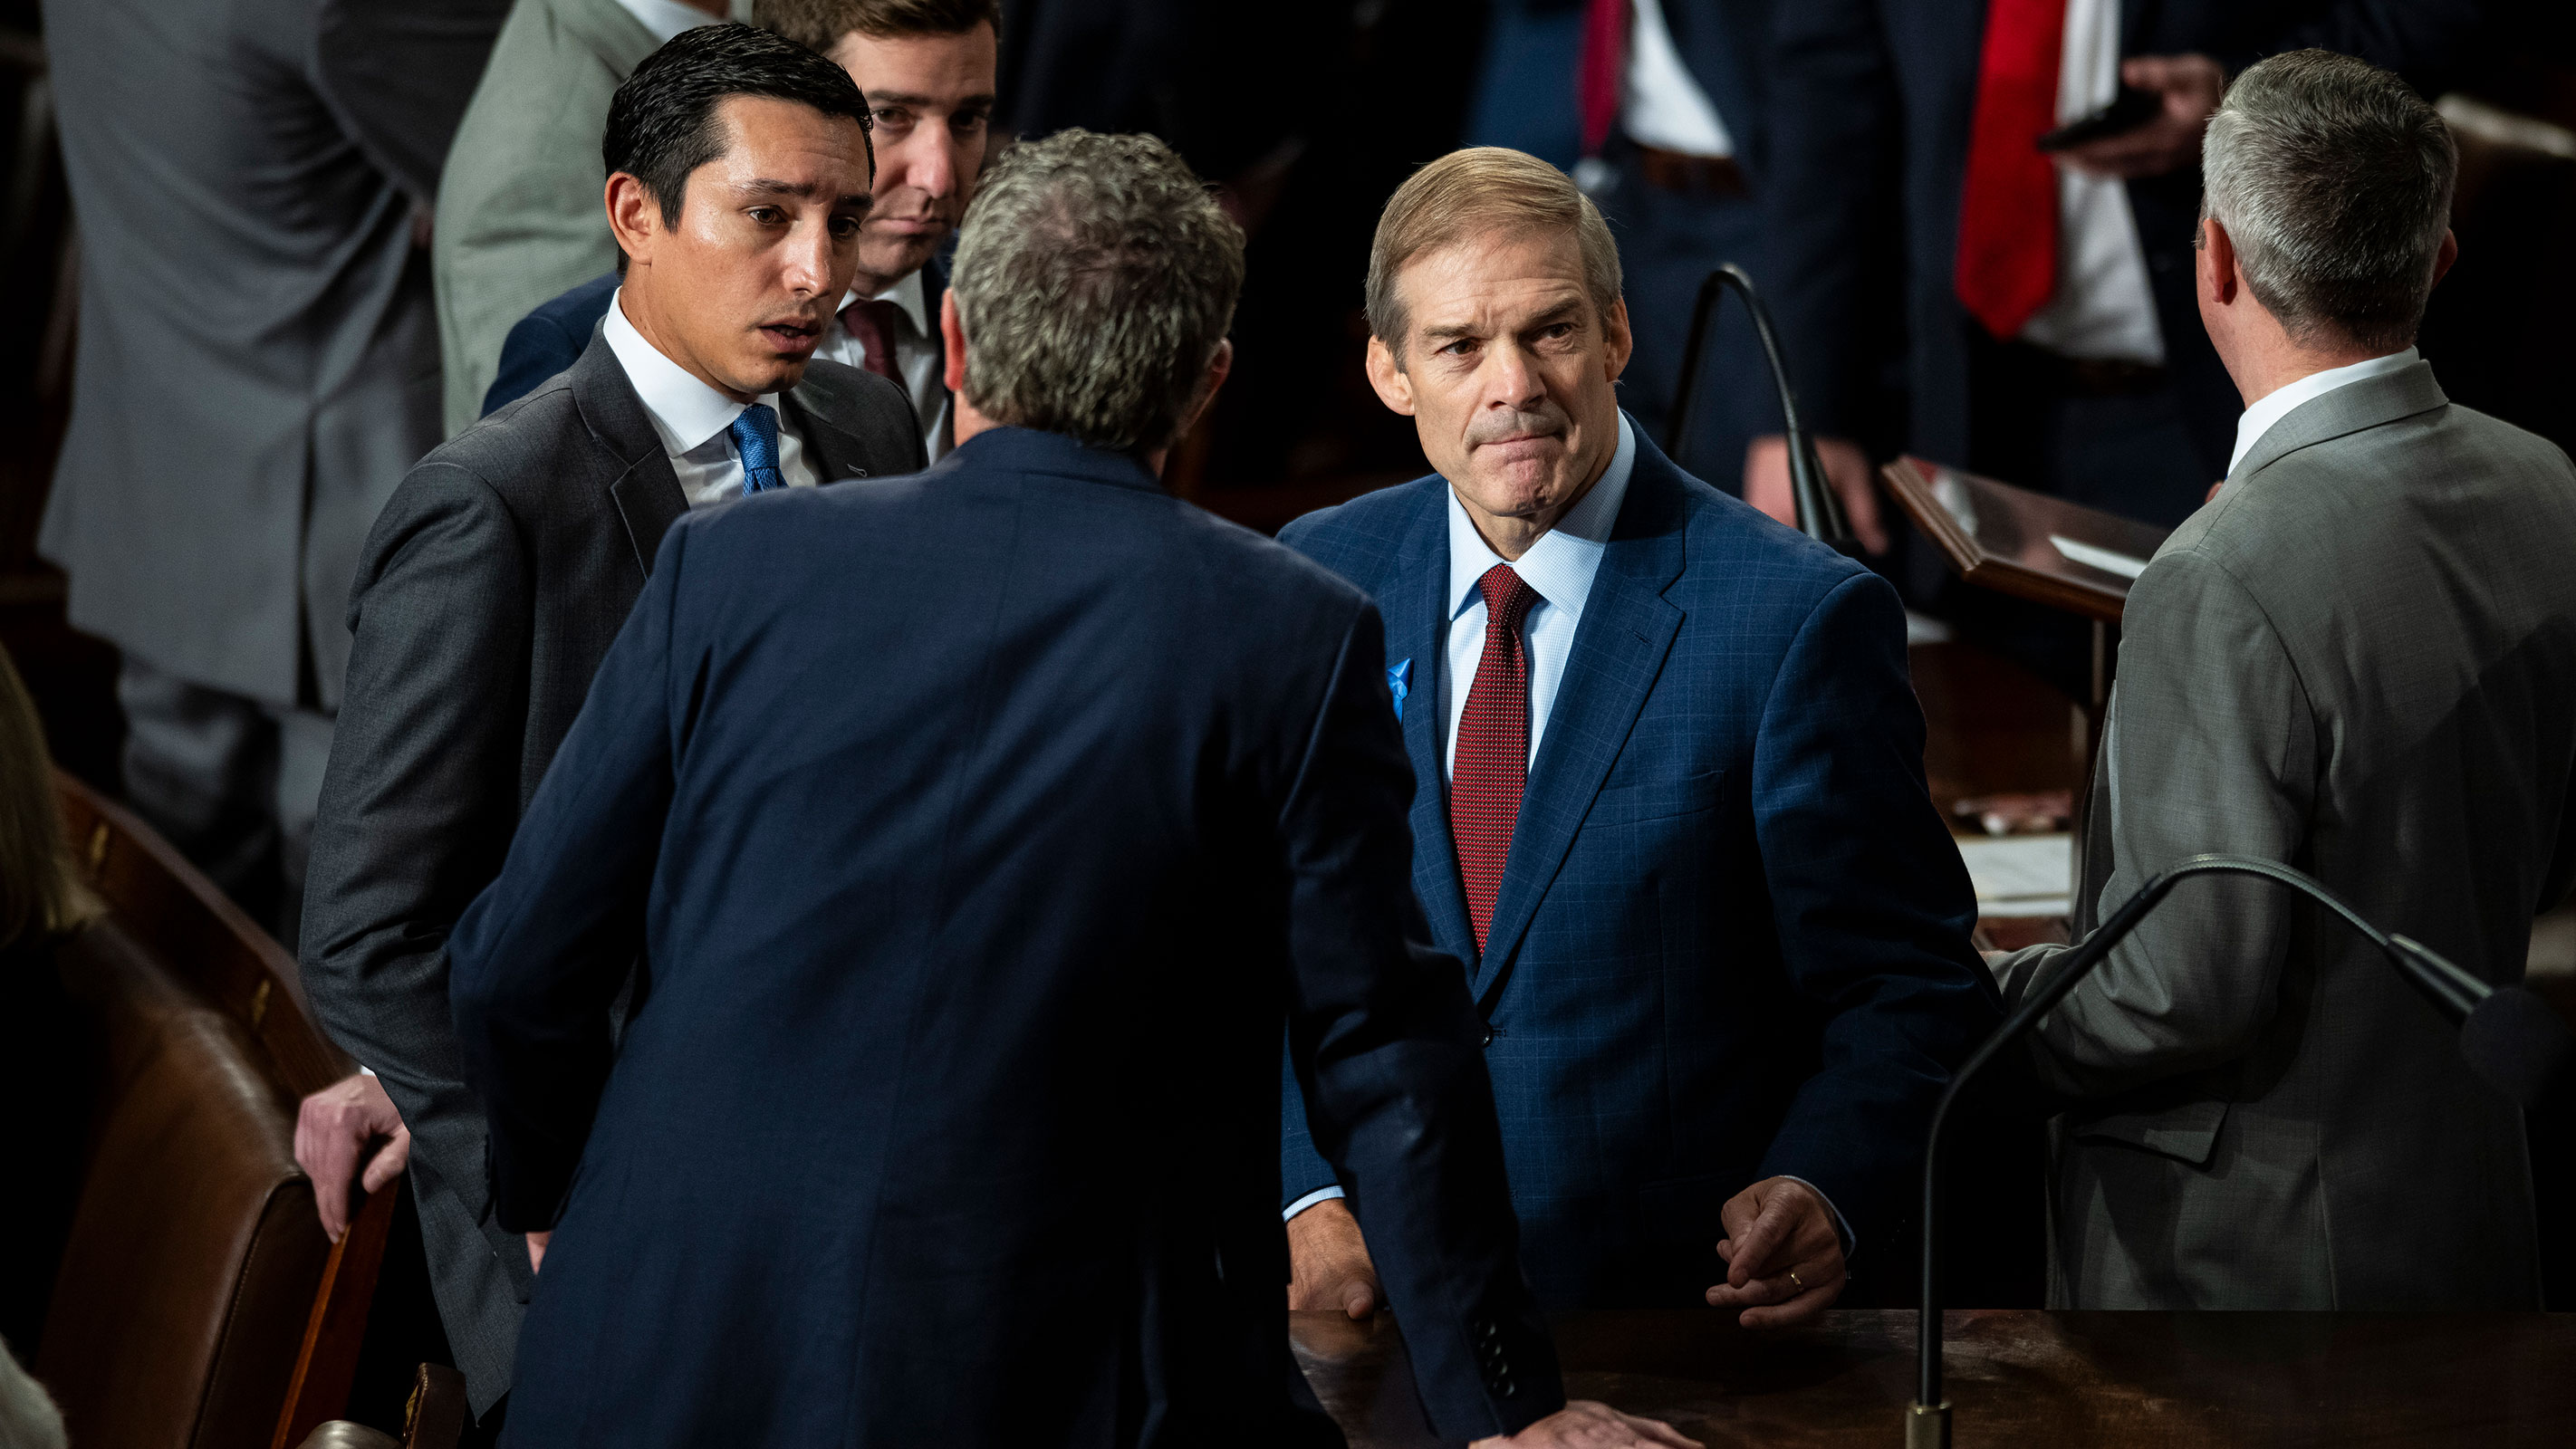 Rep. Jim Jordan speaks with lawmakers and aides before a second round of voting for Speaker of the House begins on Wednesday.